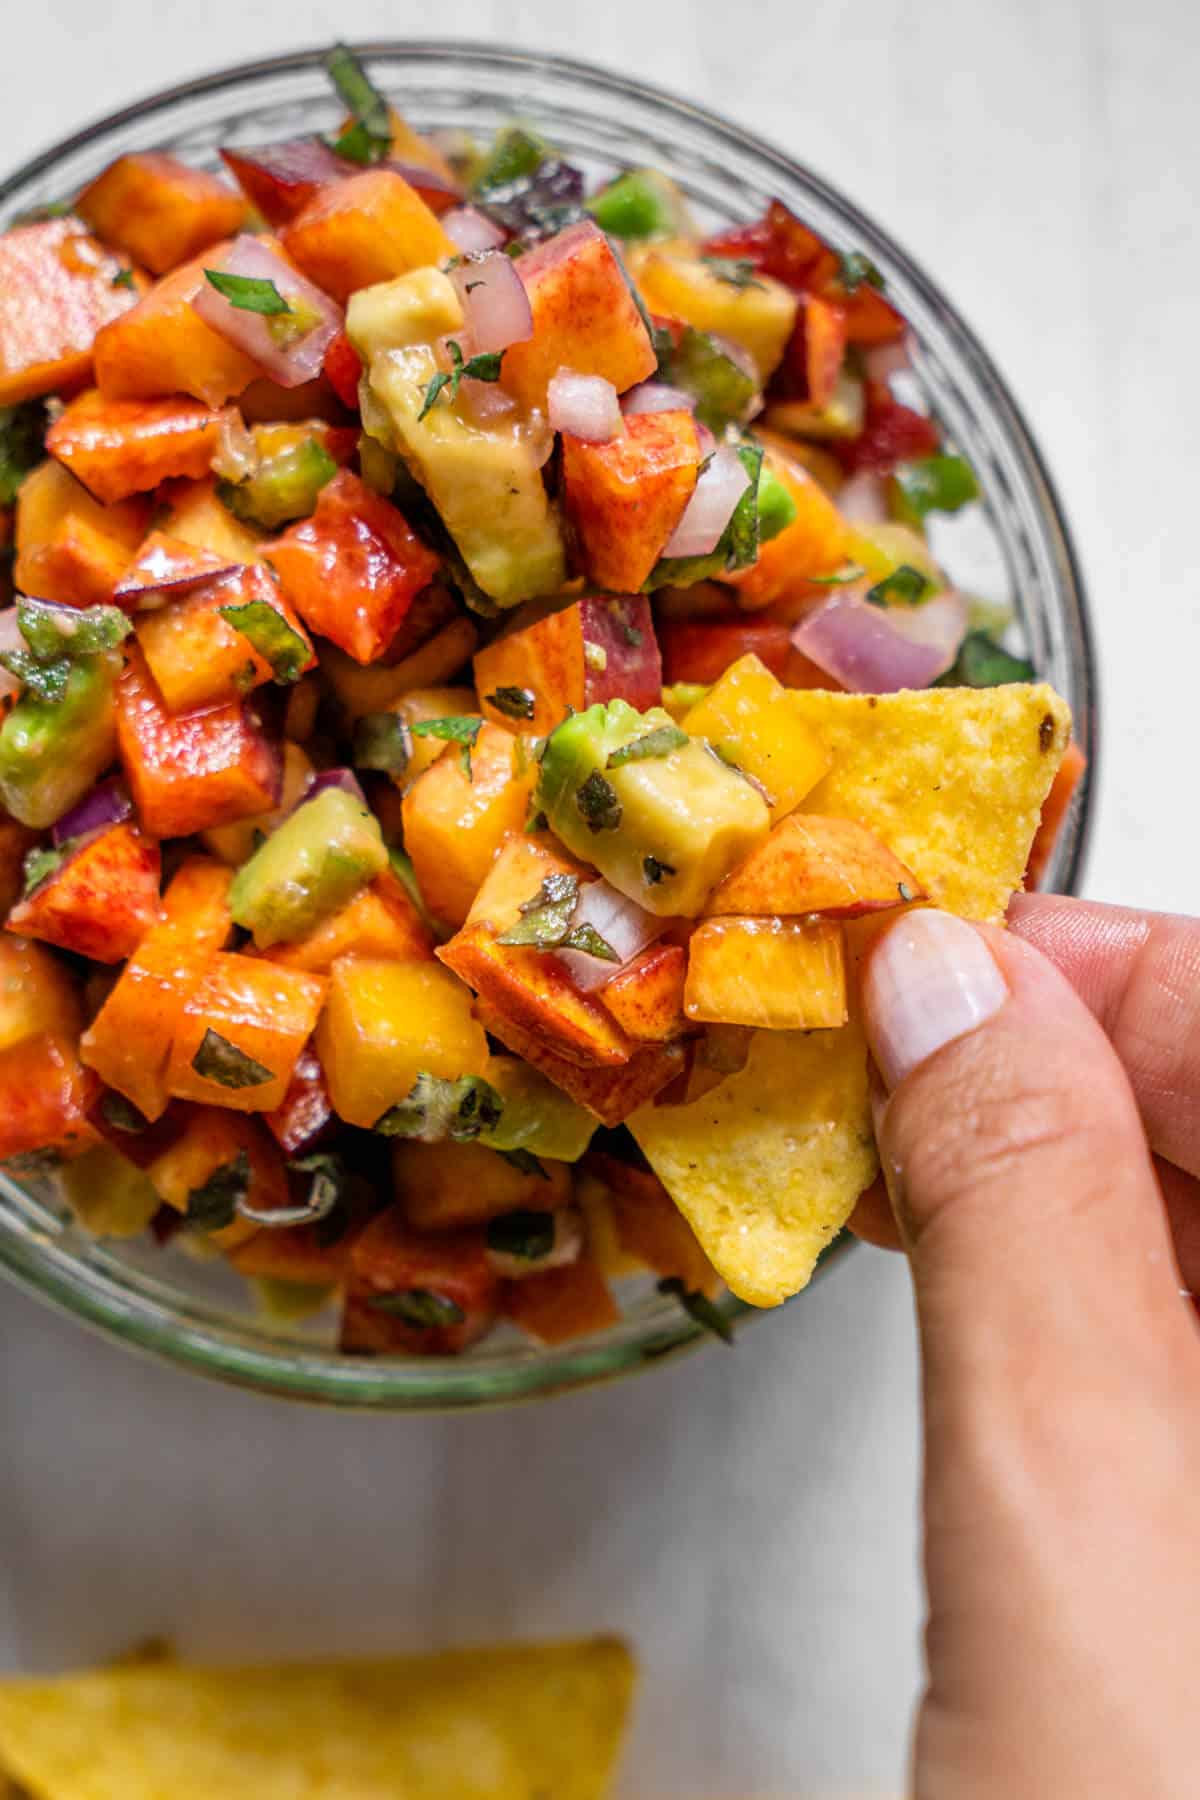 Corn chip being dipped into Peach salsa